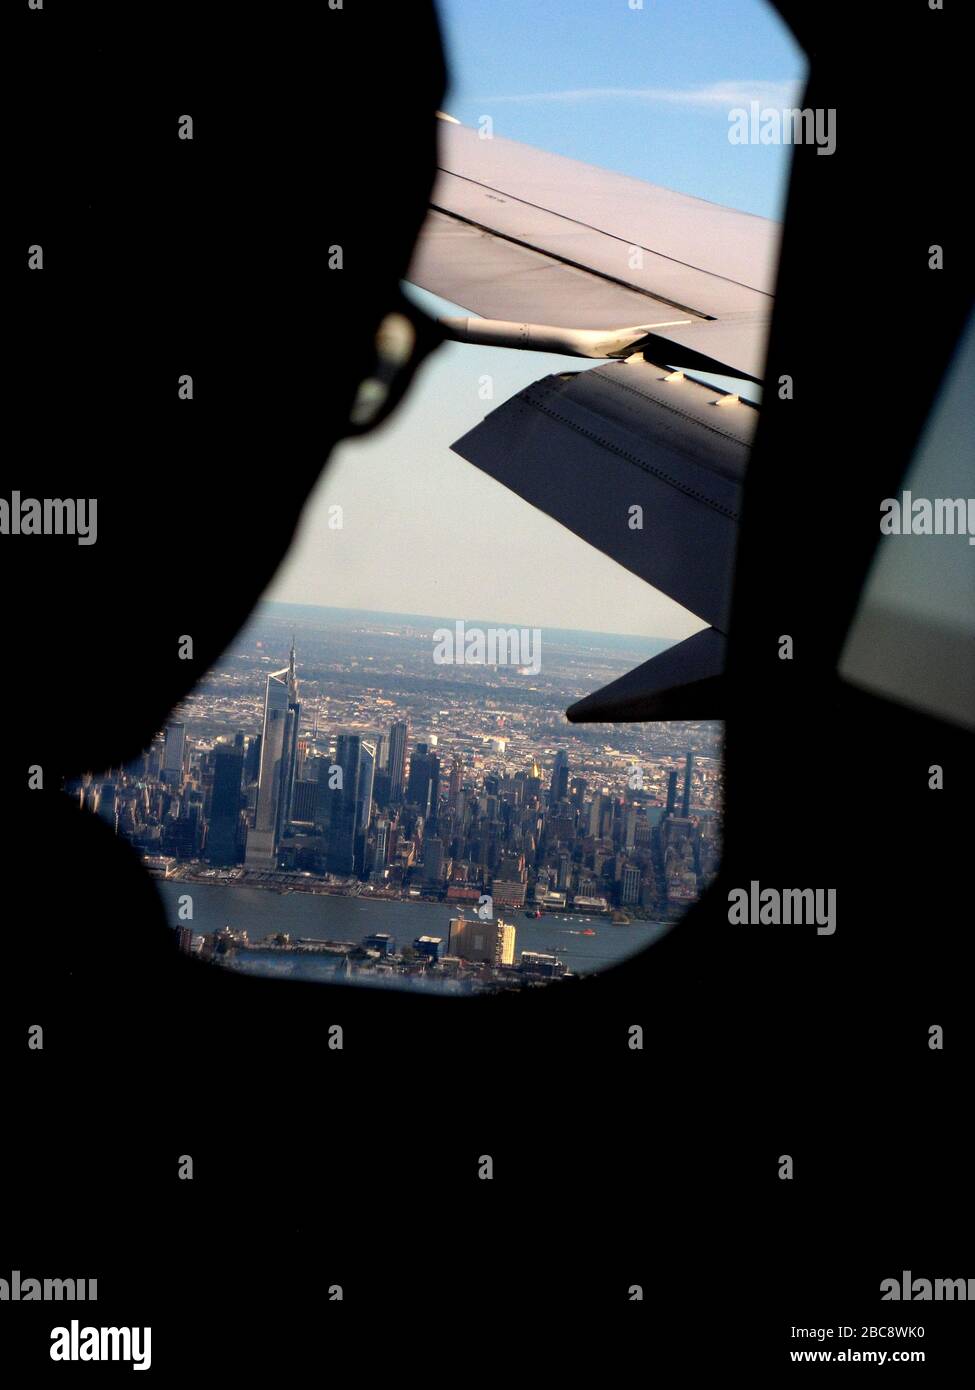 Silhouette of a man in glasses looking at the Manhattan skyline from a plane window Stock Photo